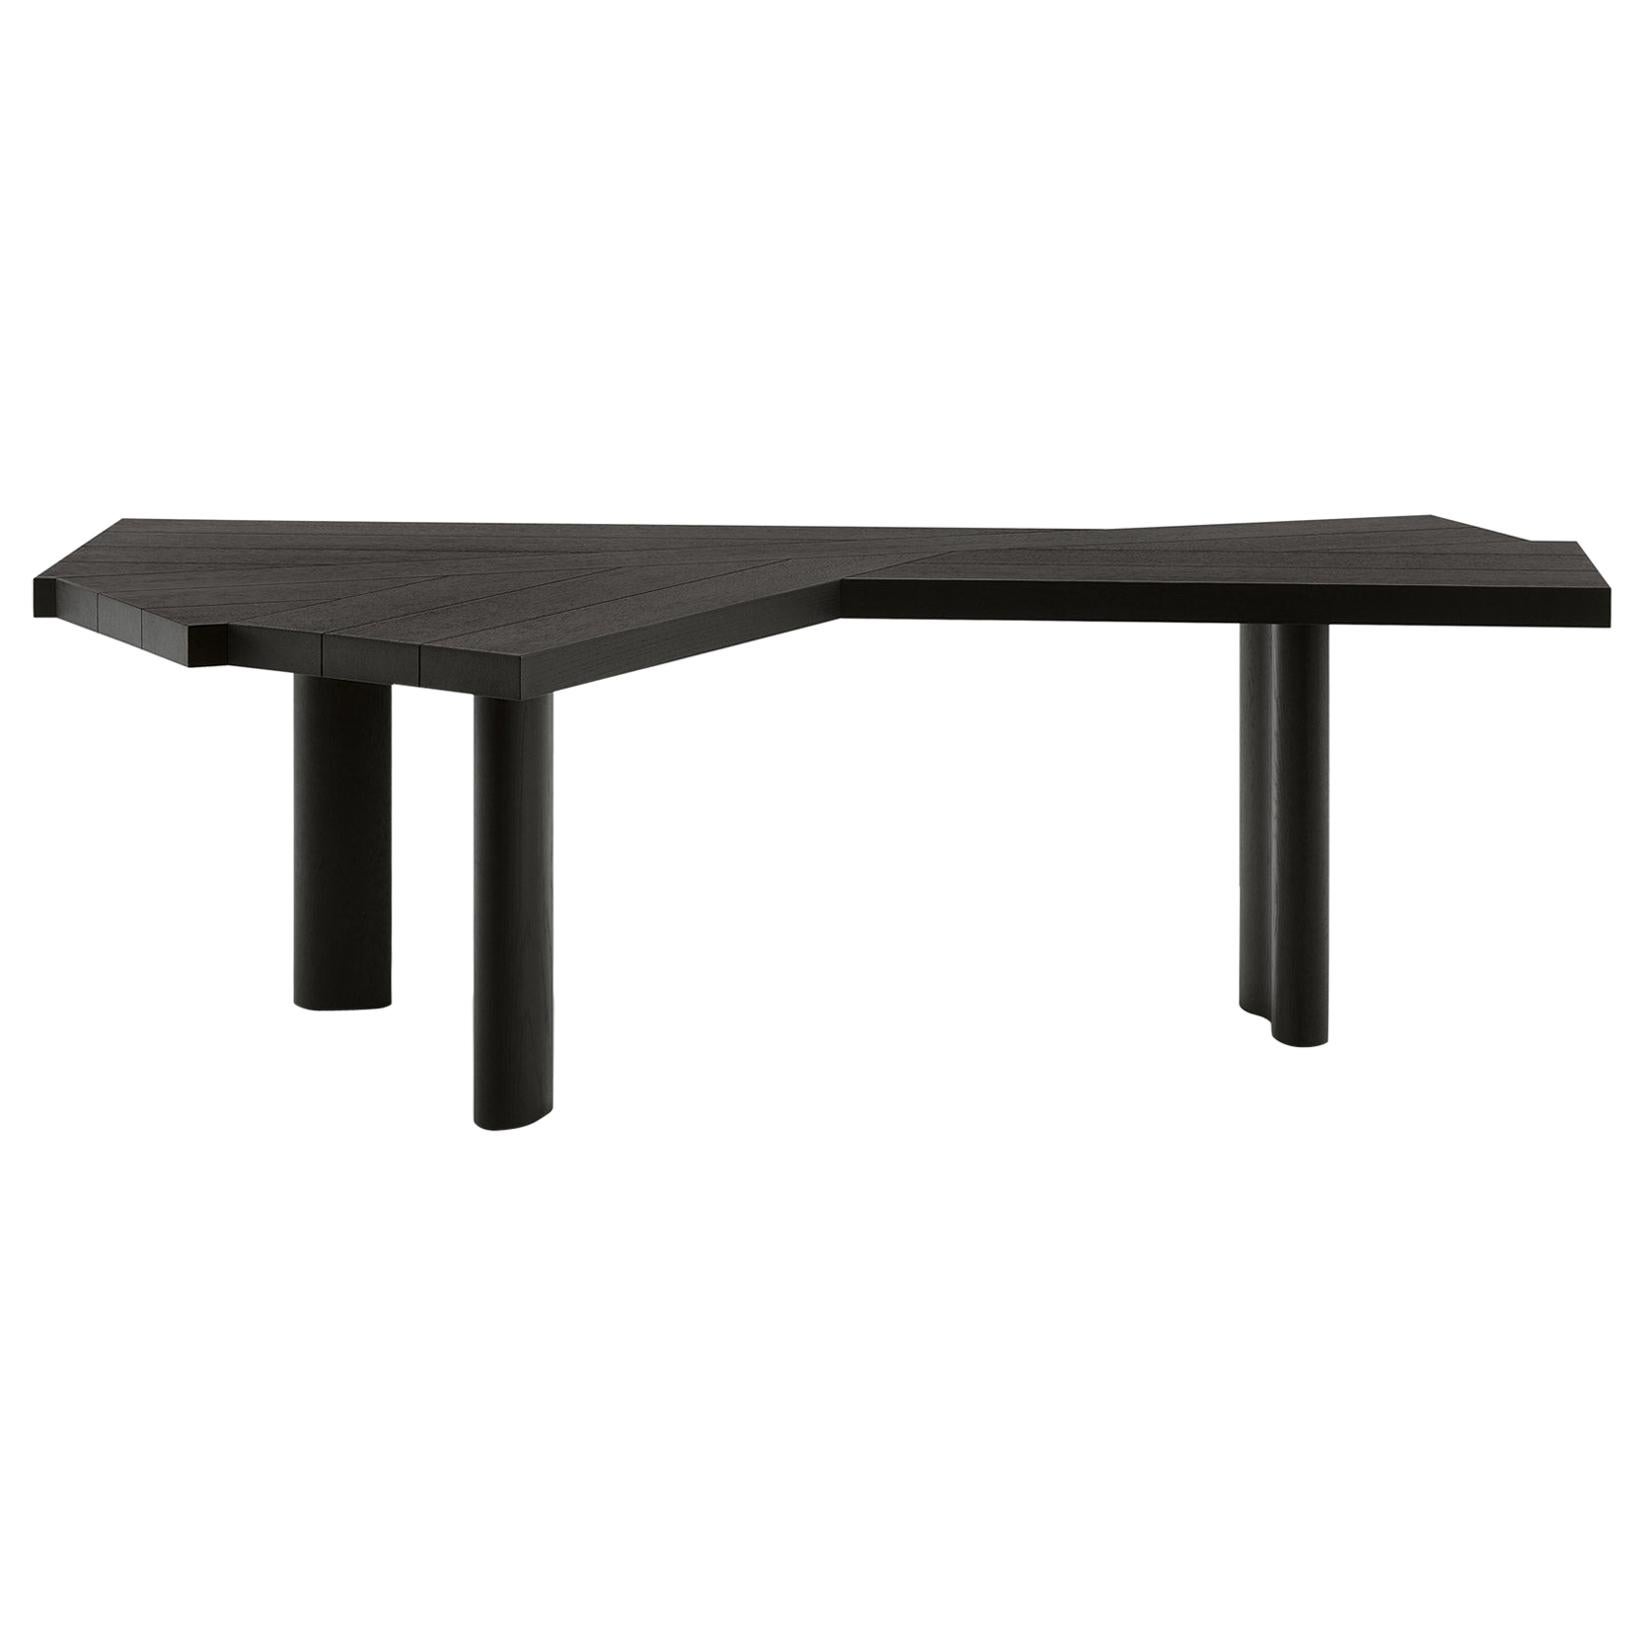 Charlotte Perriand Ventaglio Wood Stained Black Table by Cassina For Sale